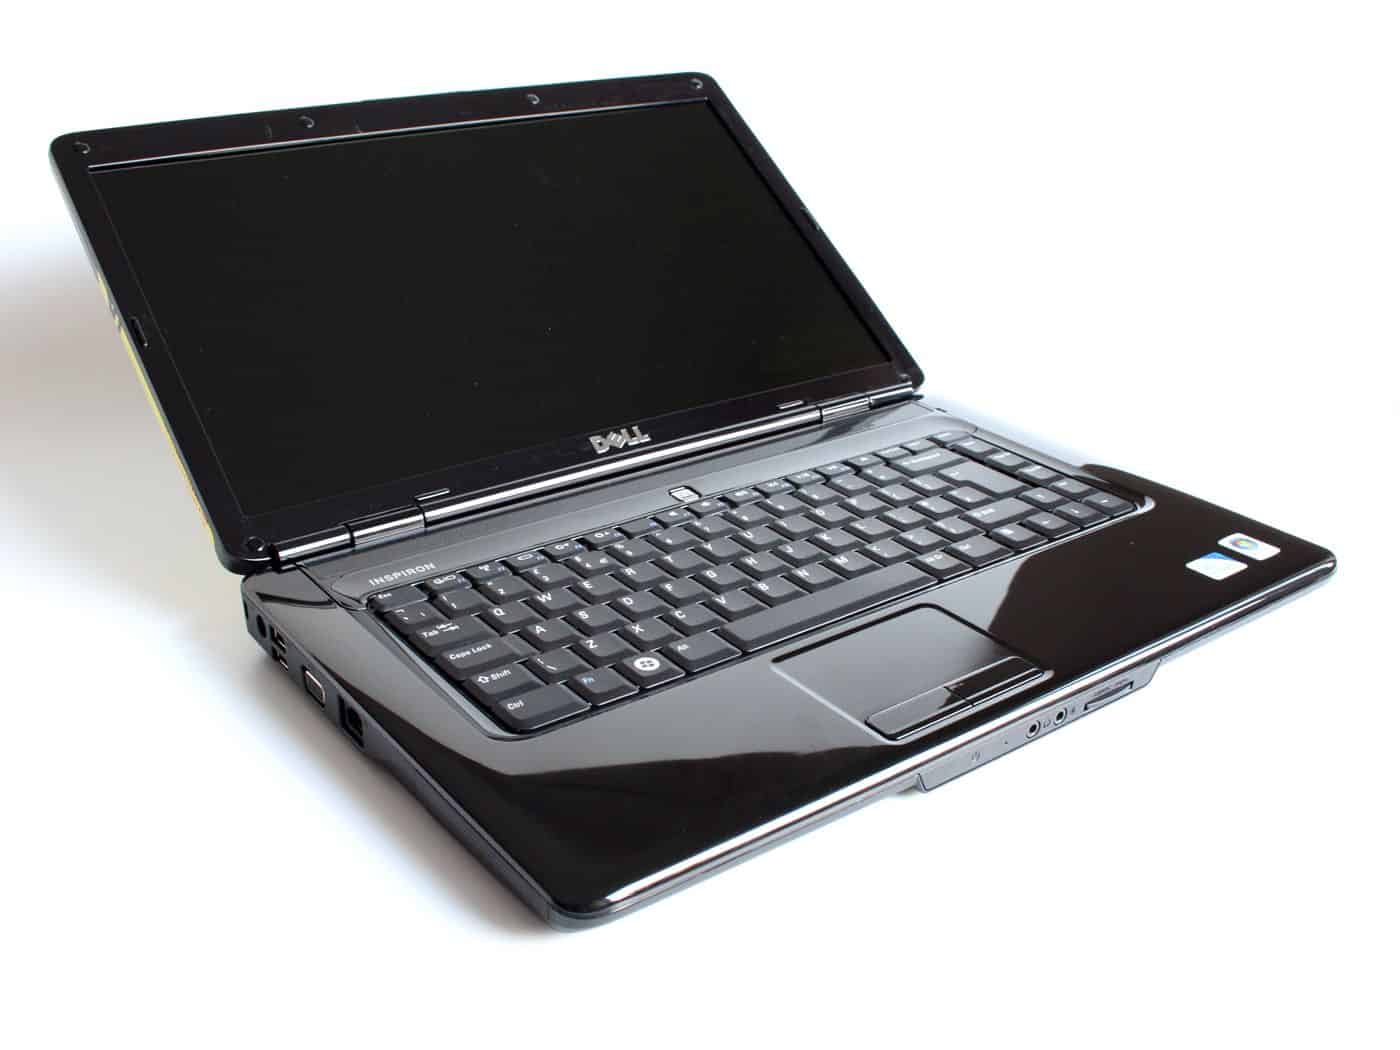 dell inspiron 1545 laptop manual download